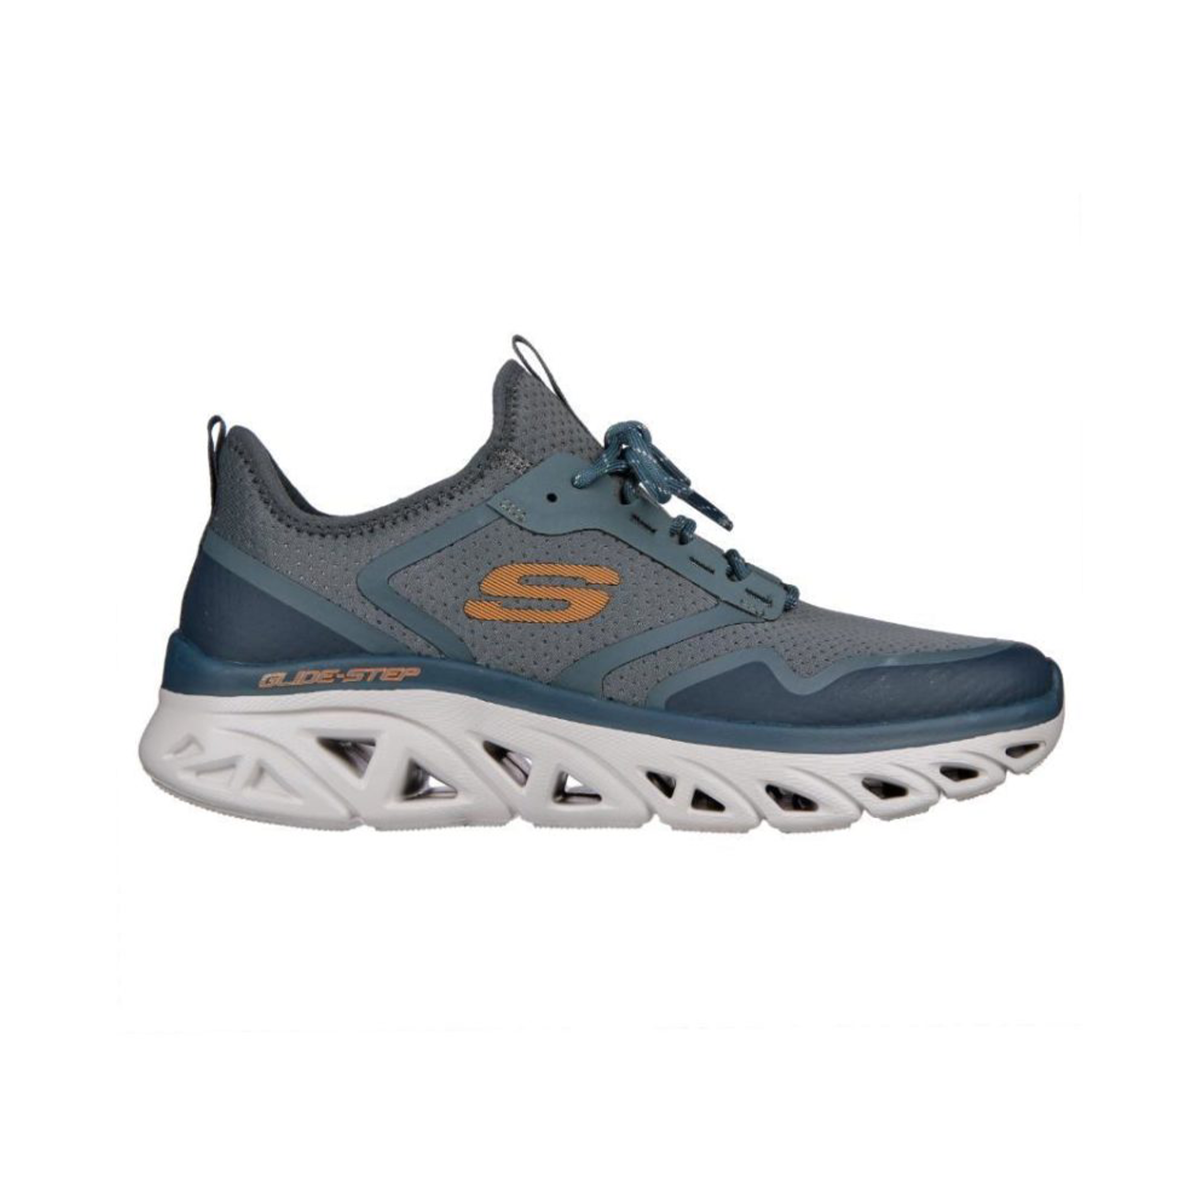 Lifestyle Glide-Step Sport Shoes